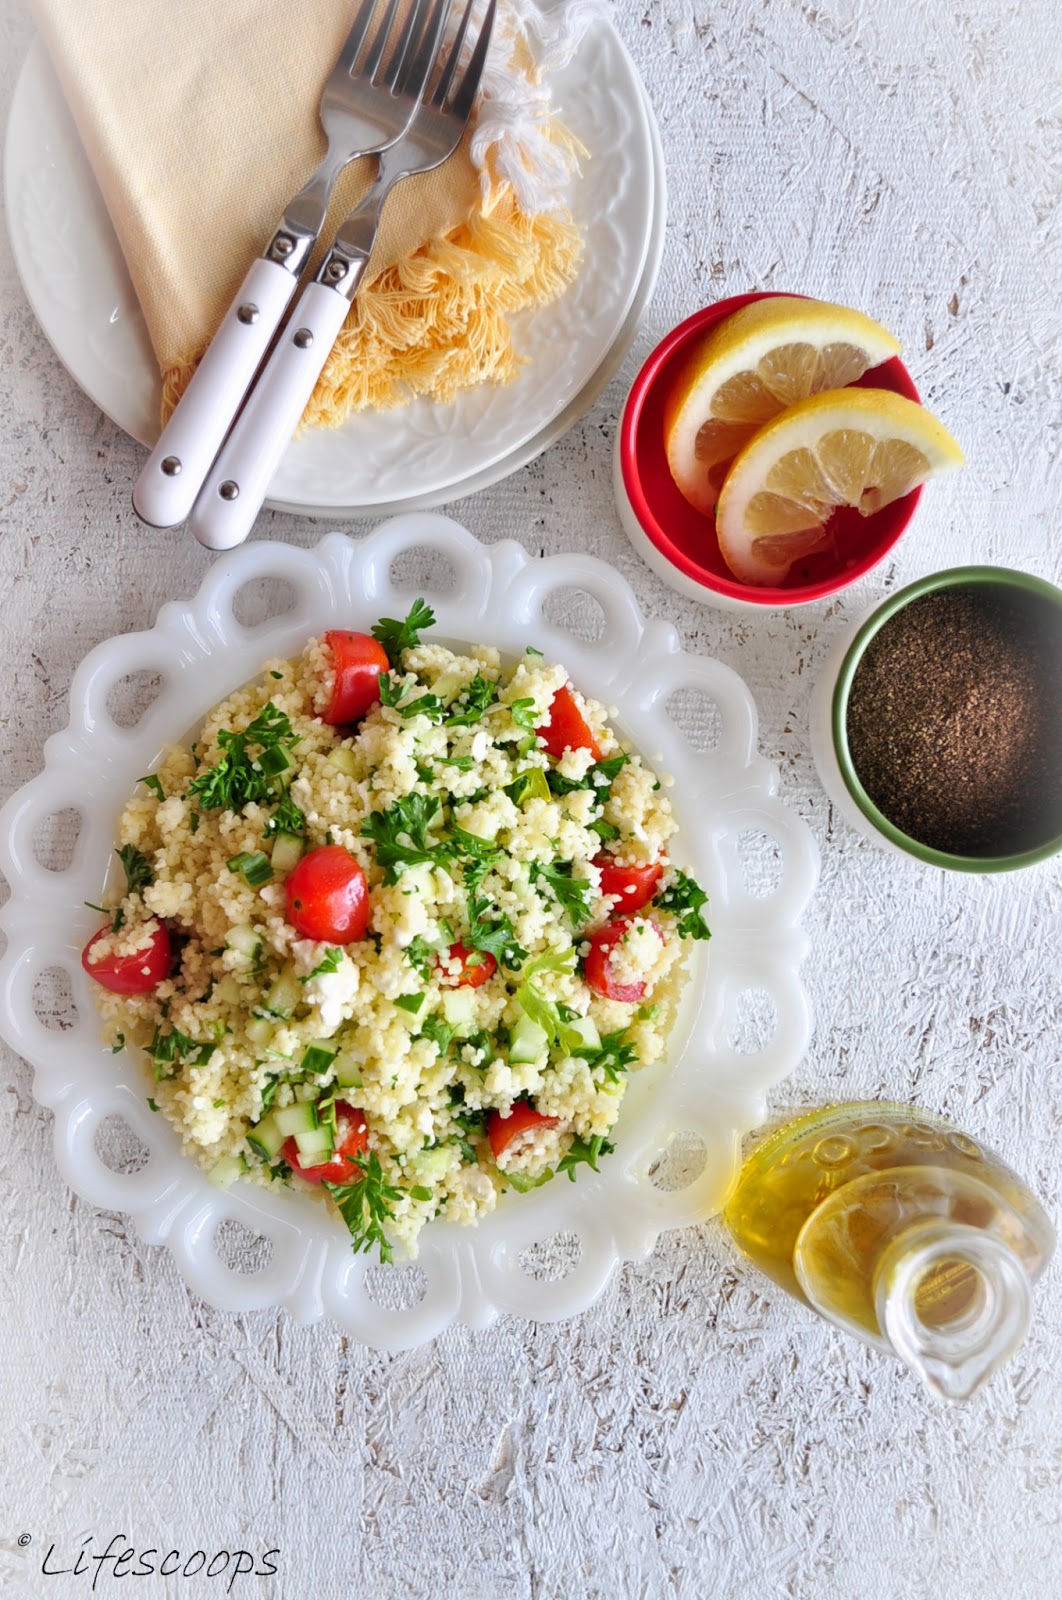 Life Scoops: Mediterranean Couscous Salad with Feta Cheese